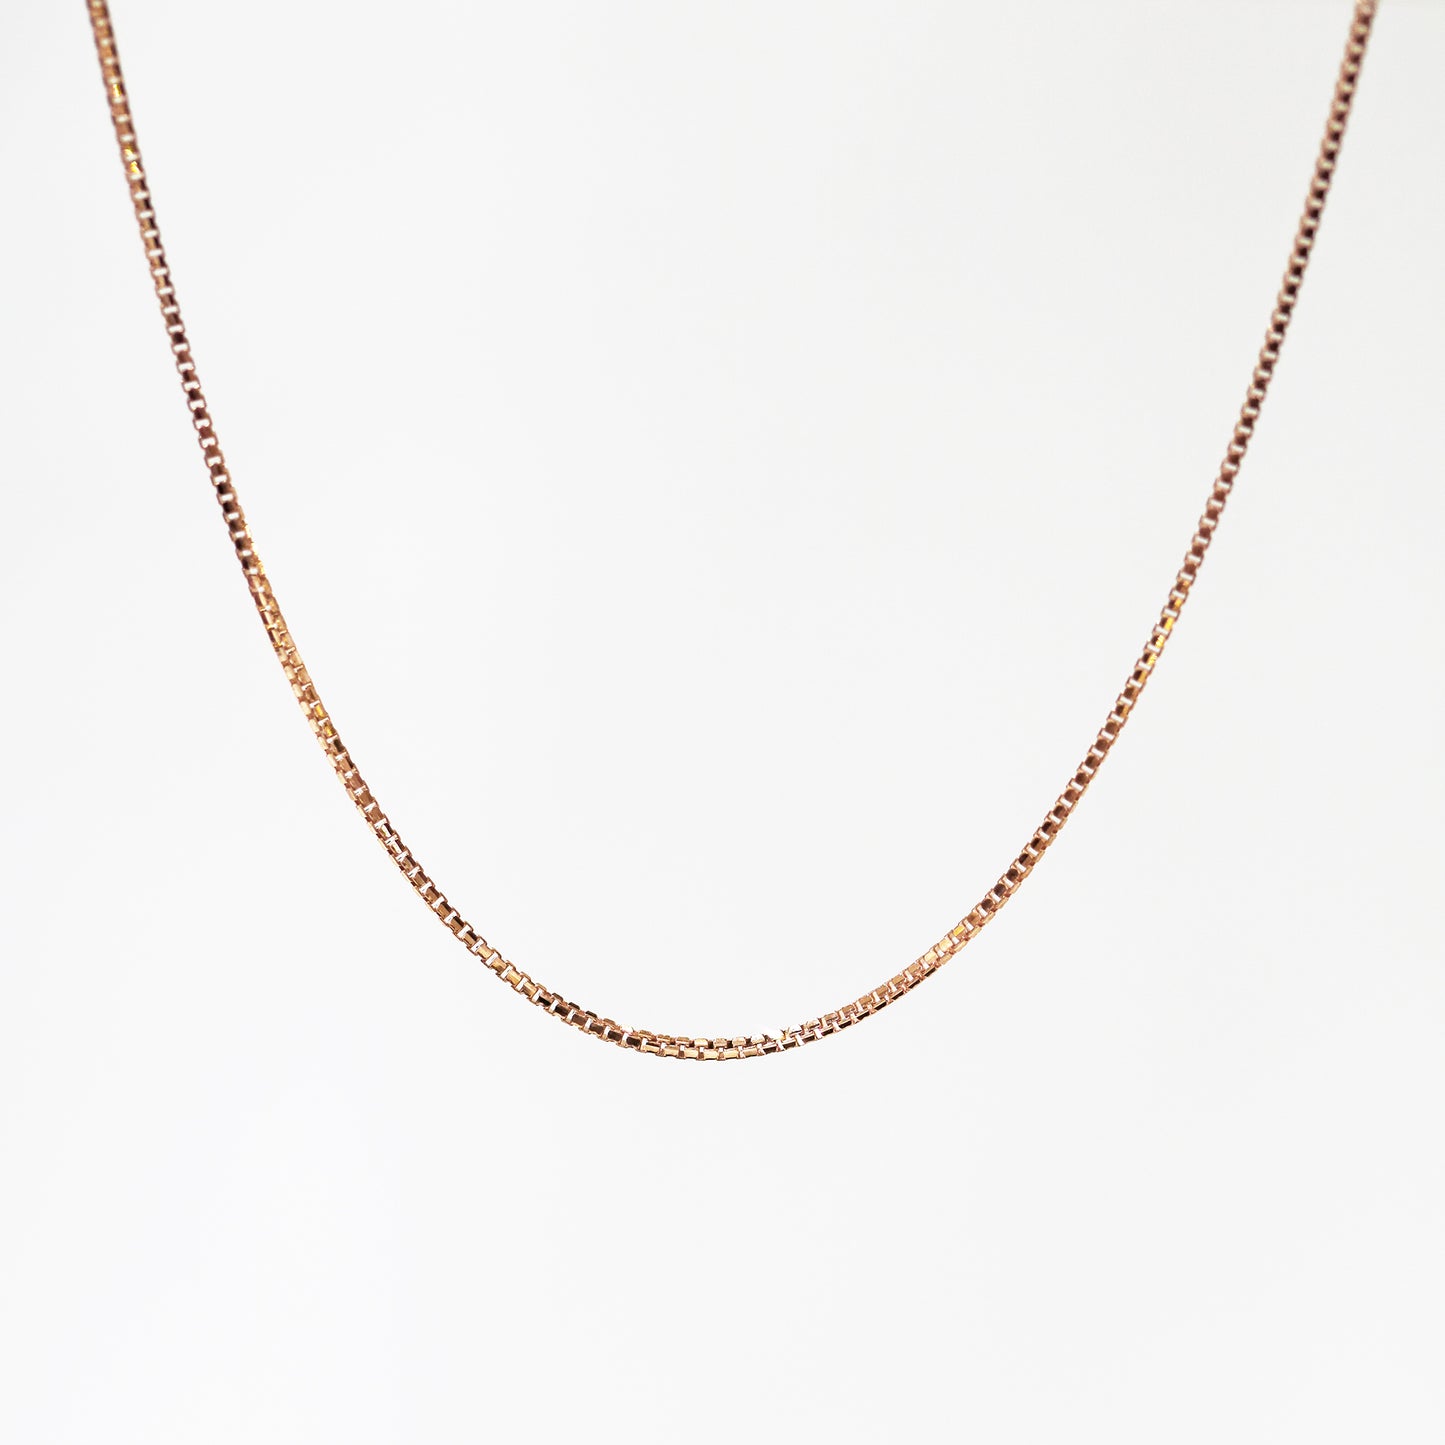 18k Gold Chain Necklace, Different styles (White/Rose/Yellow Gold)